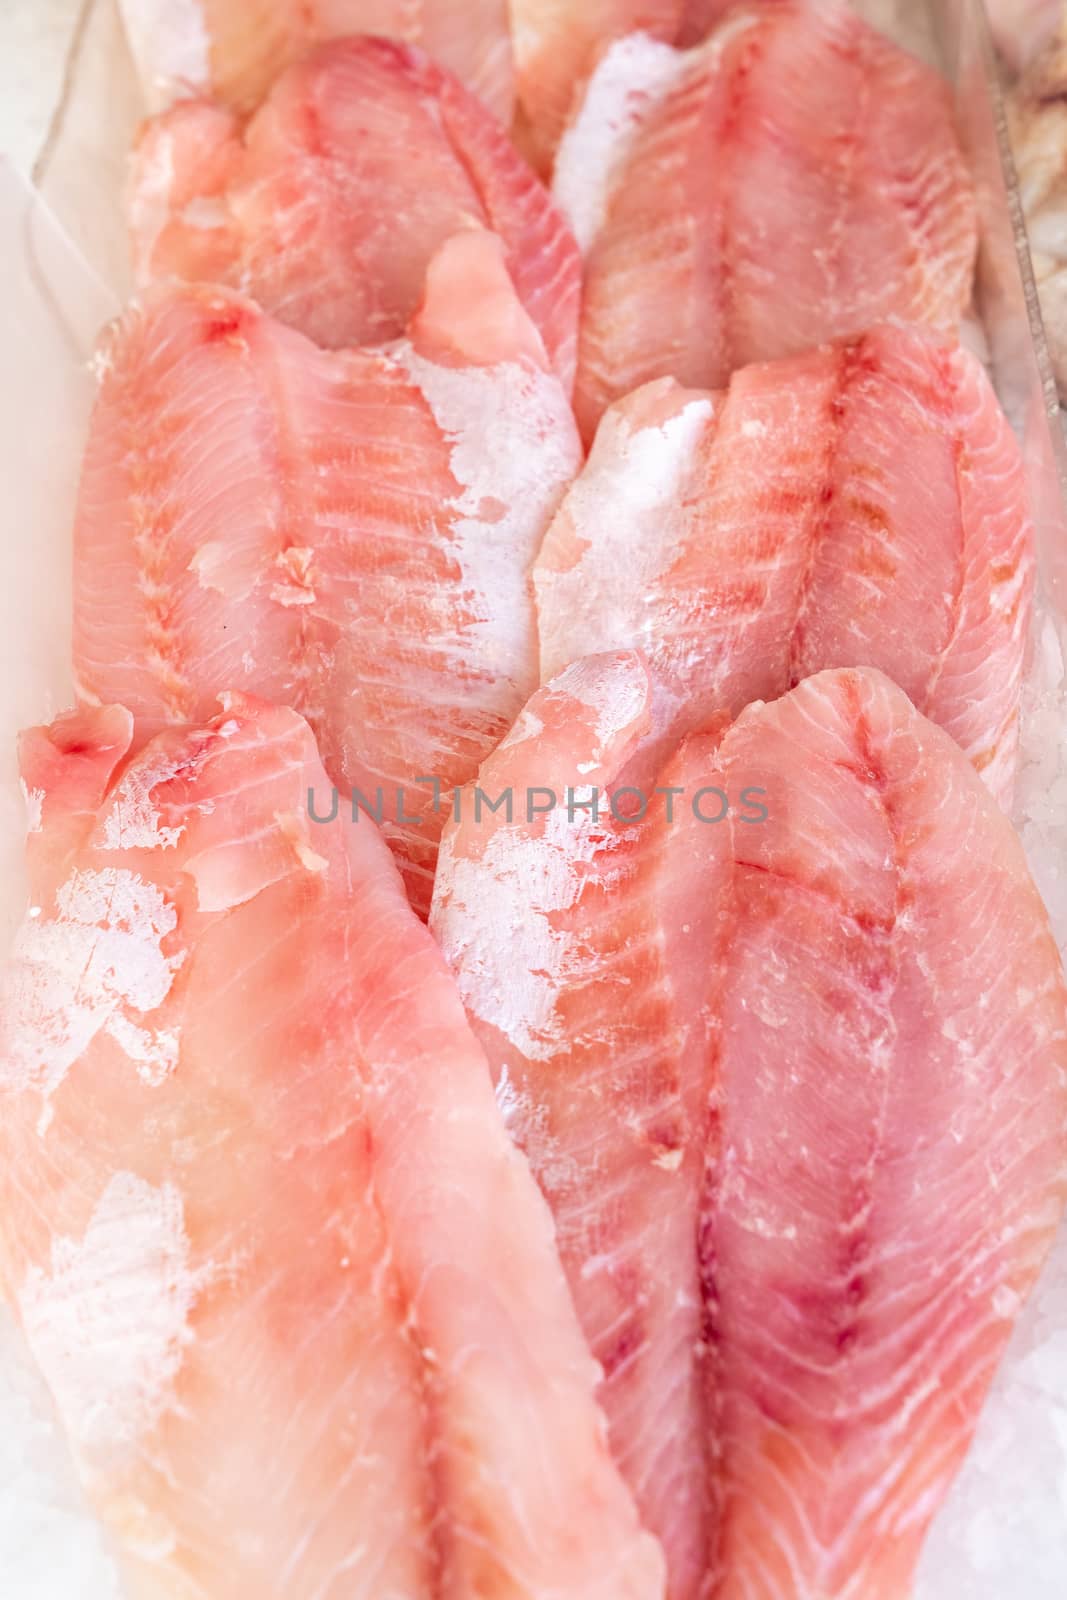 African perch fillet on ice at seafood market by Robertobinetti70